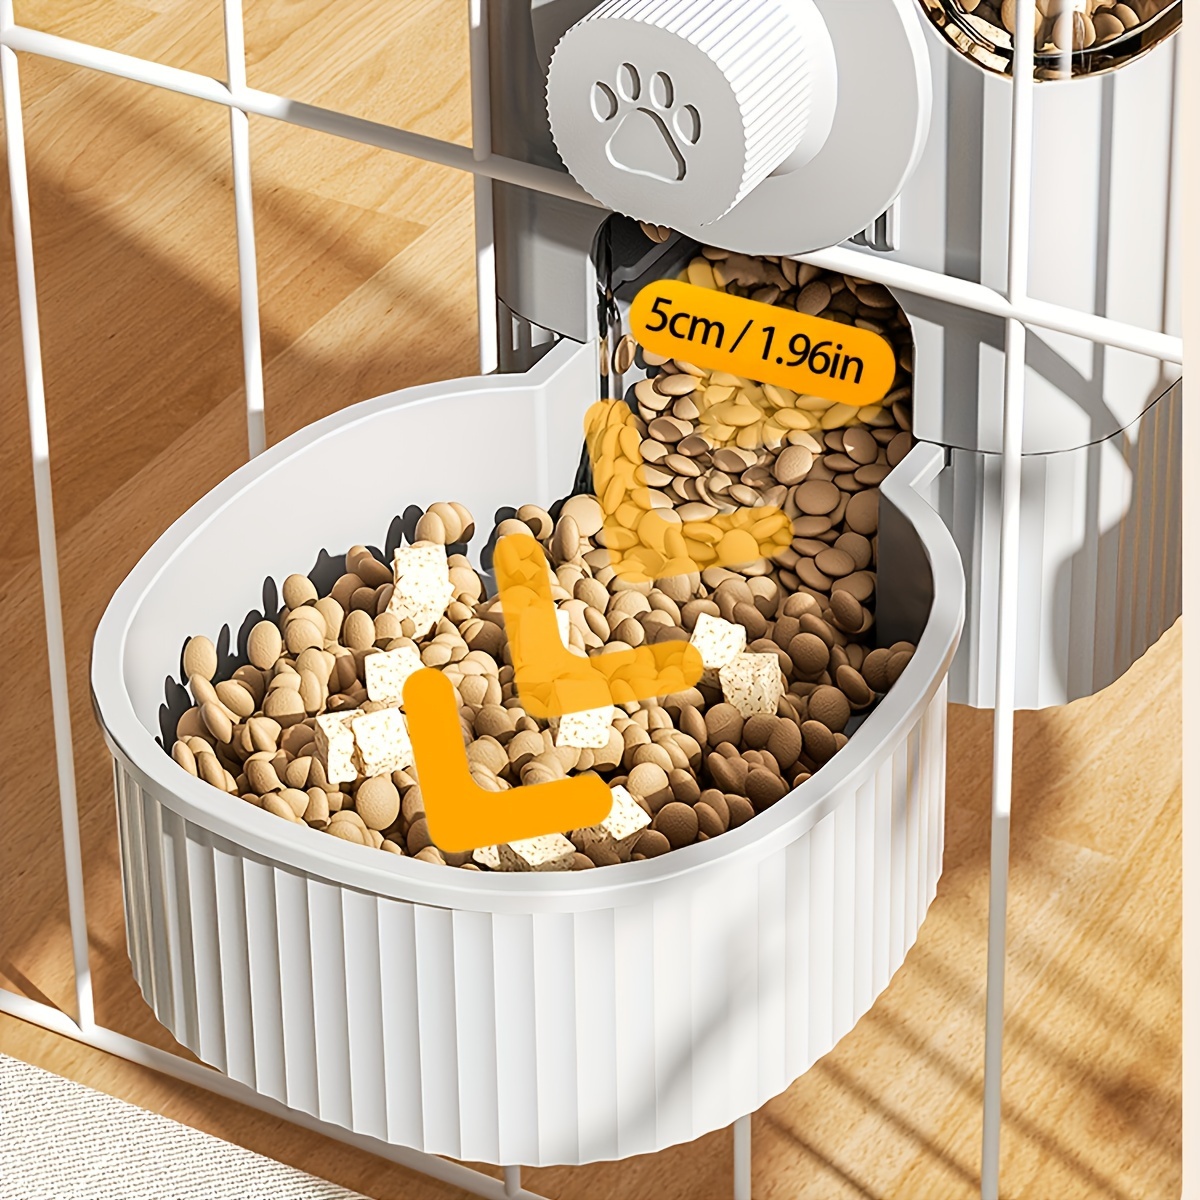 

1pc Hanging Automatic Pet Food Feeder/water Dispenser For Dog Cat Small Pet Hamster, Large Capacity Gravity Auto Feeder Drinking Fountain With Bowl For Cage